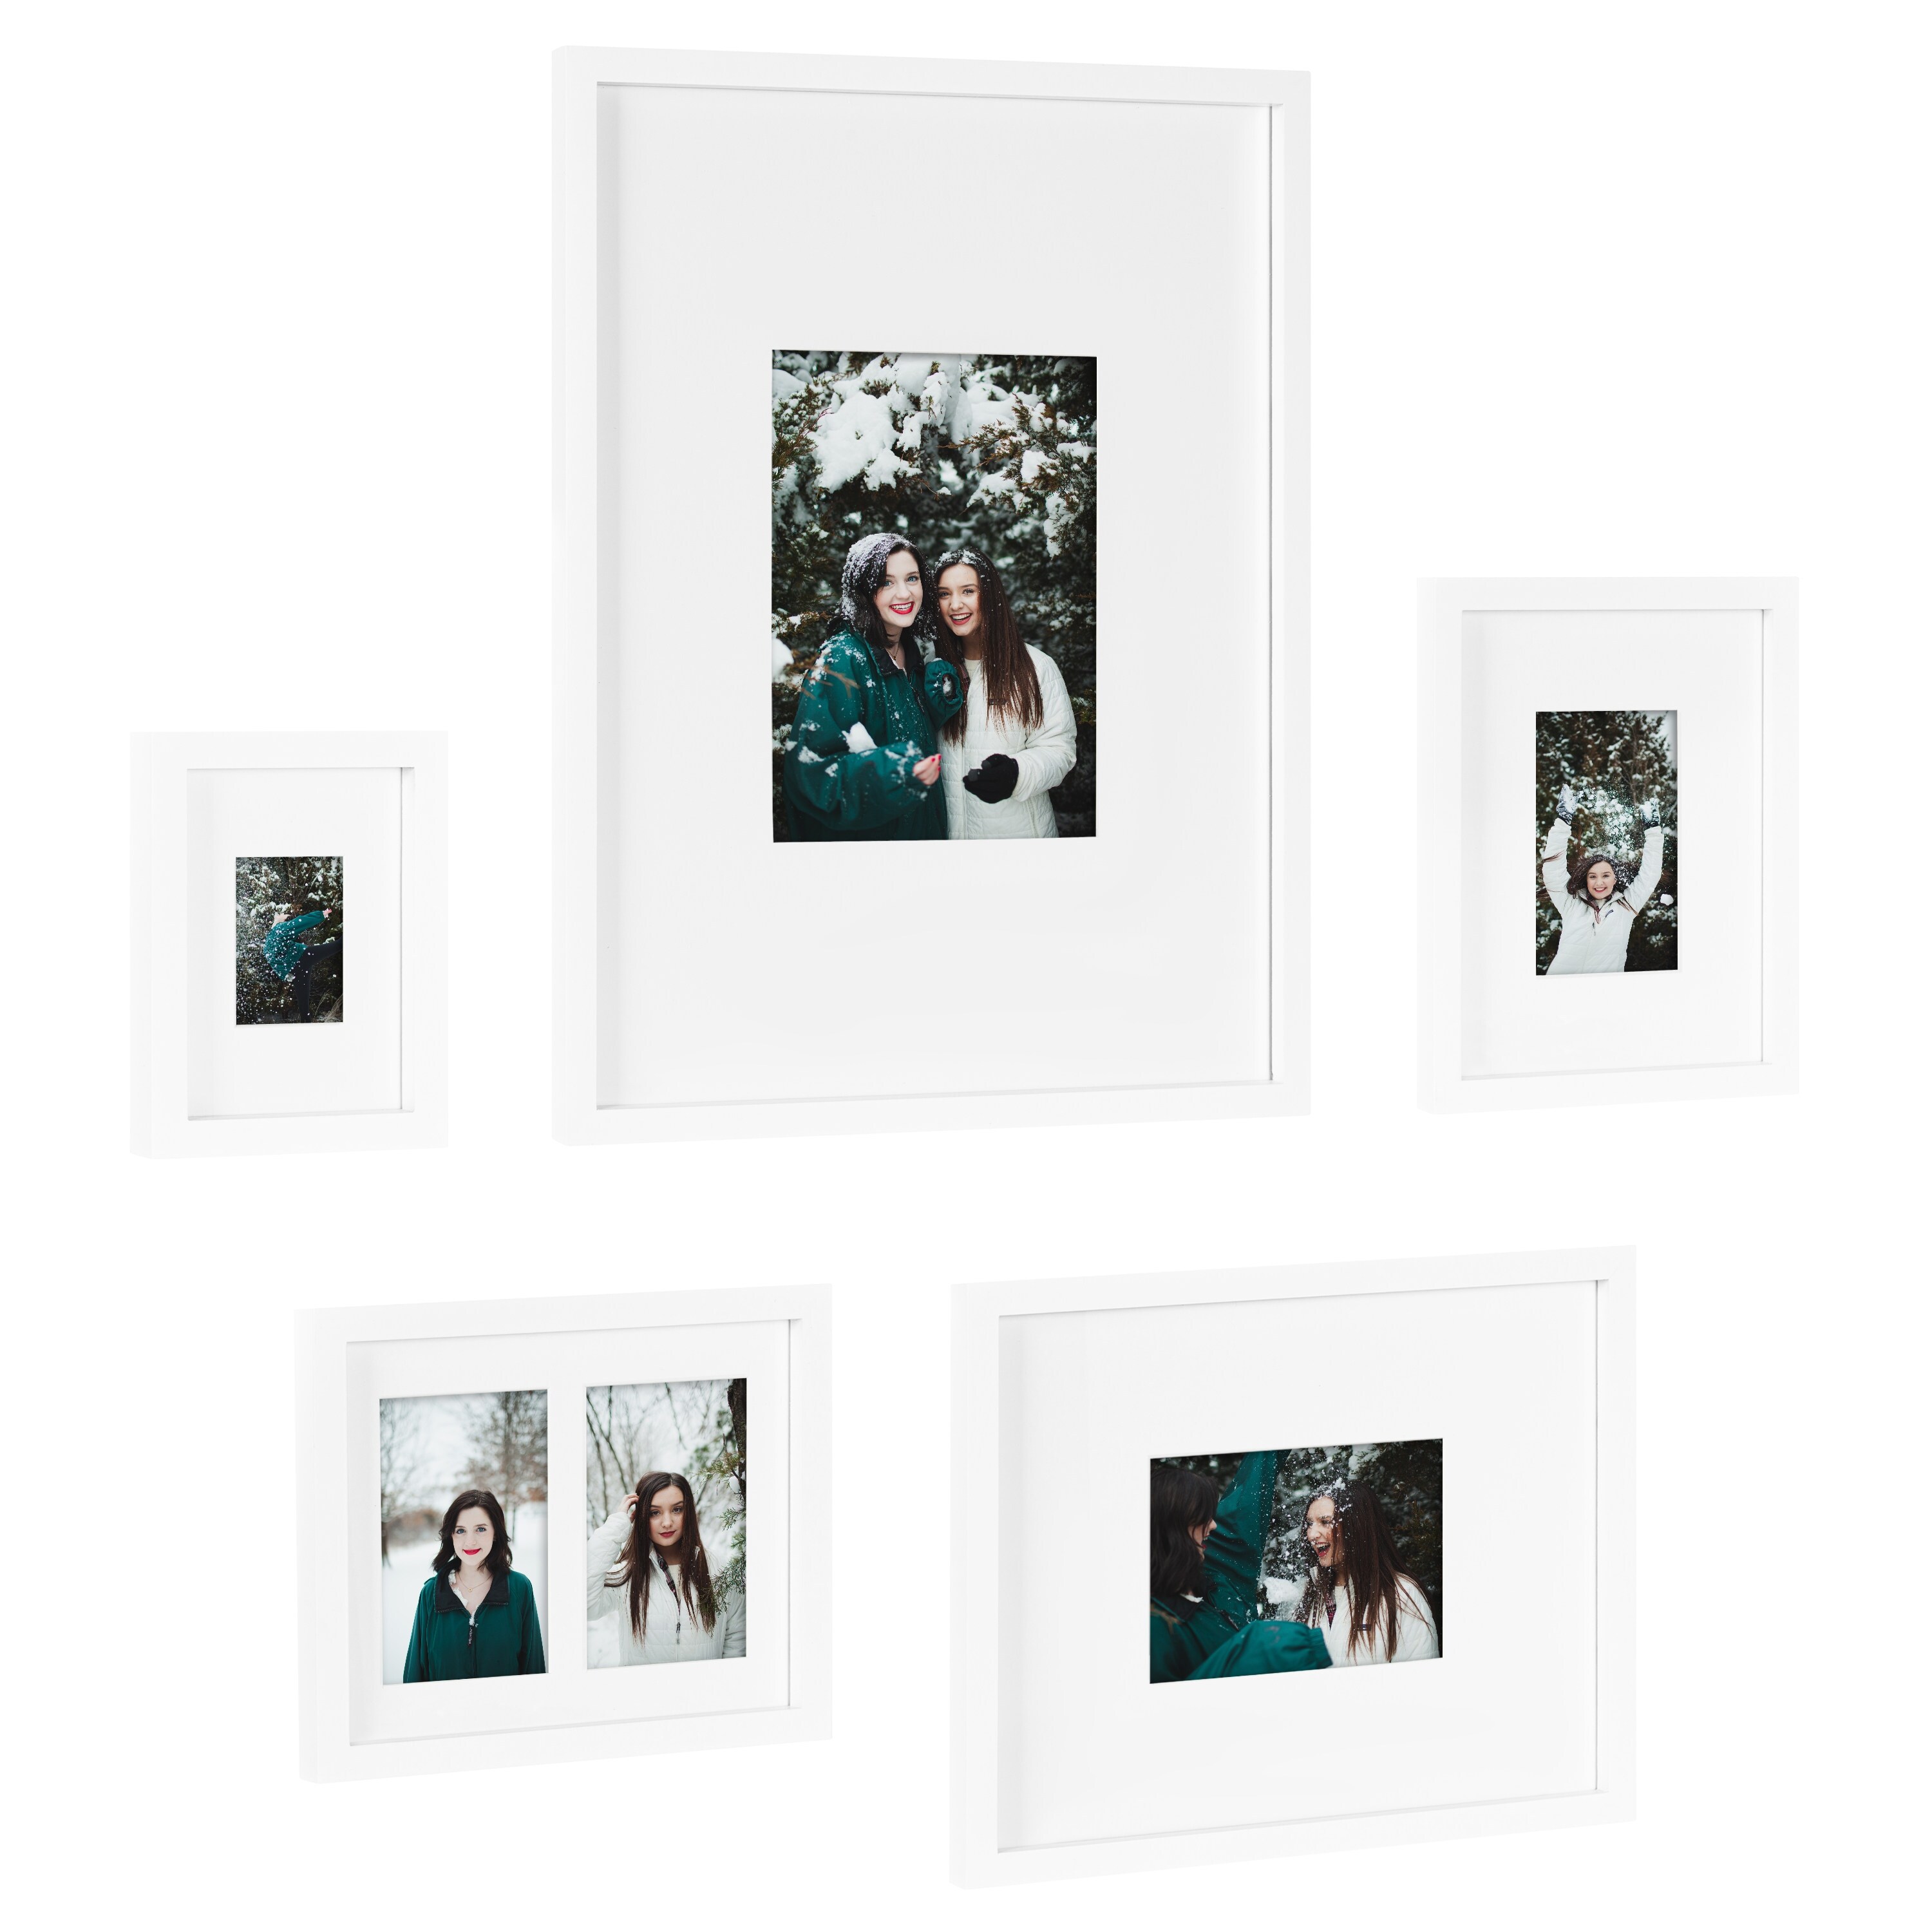 6 Piece Gallery Wall Frame Set in Multiple Sizes with Hanging Template -  Bed Bath & Beyond - 34483827